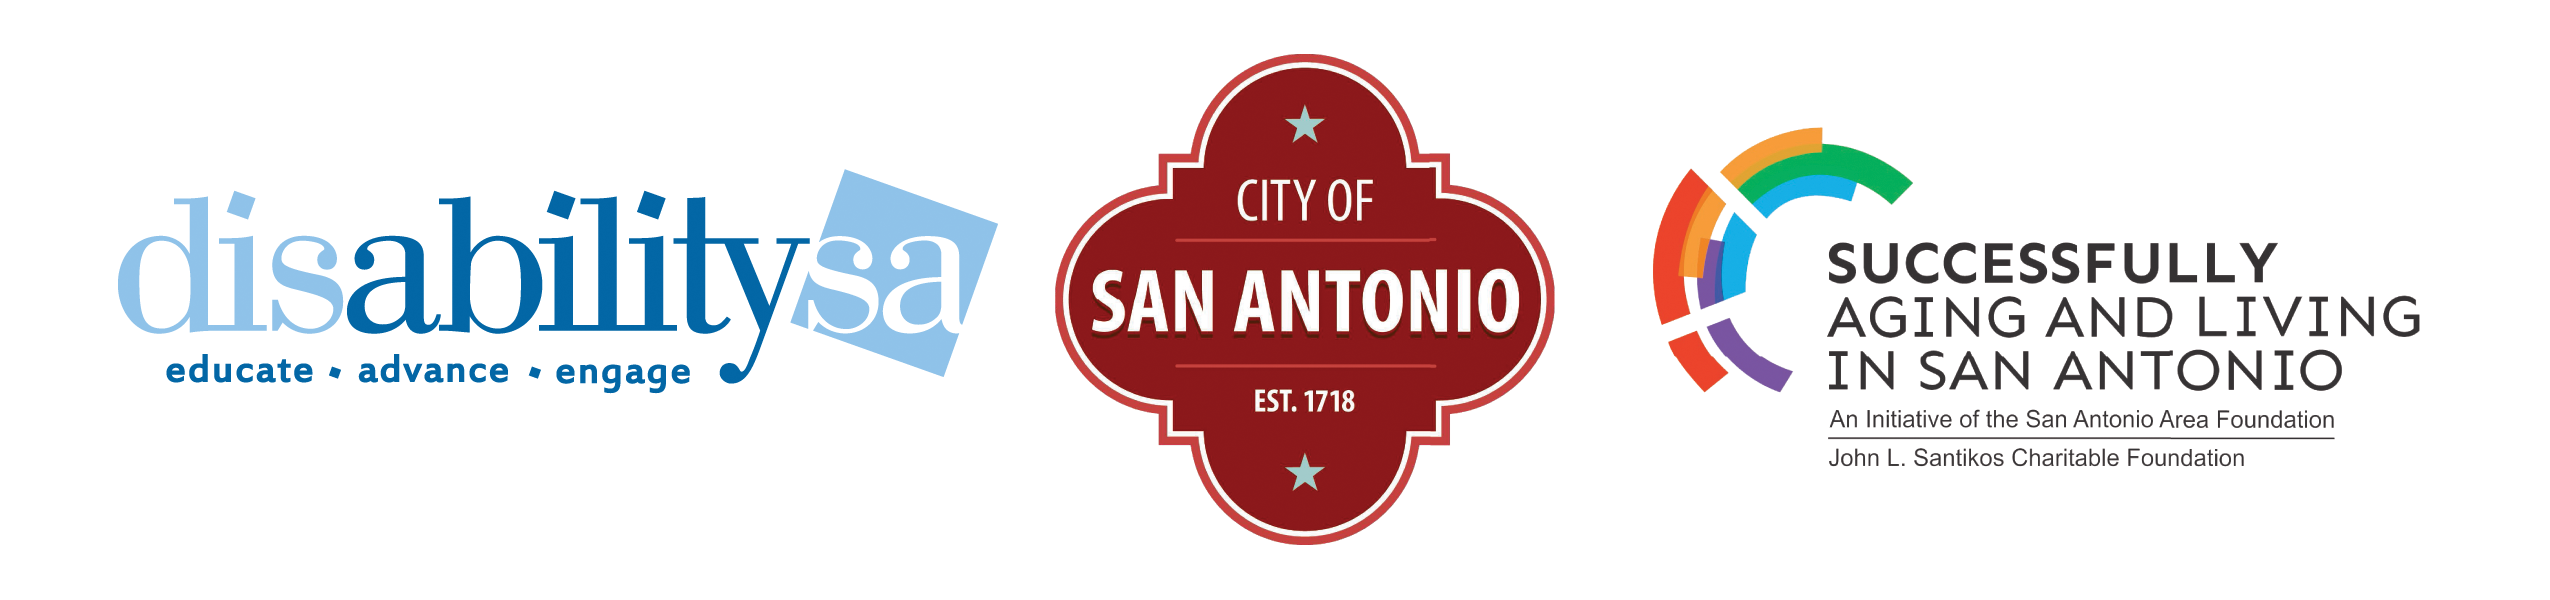 Pictures - Partner logos for disability s a, city of san antonio disability access office and the successfully living and aging in san antonio collective impact 